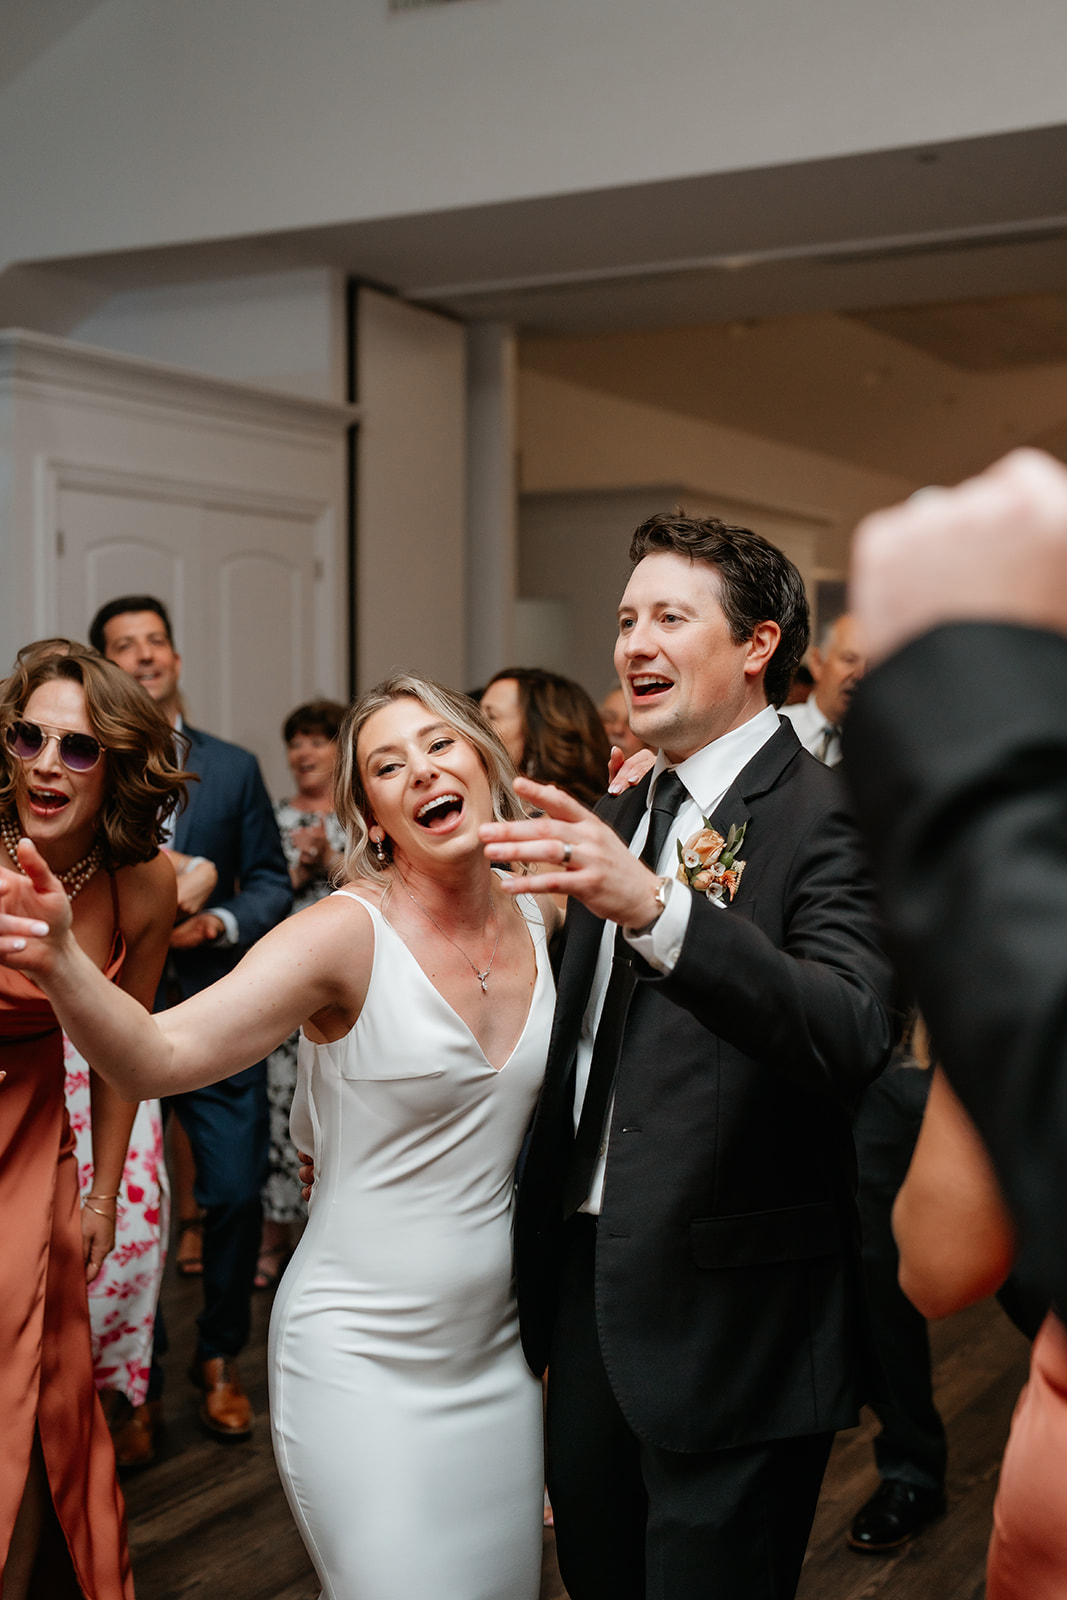 A joyful bride and groom dancing together at their wedding reception in Granite Links celebrating their special day with love and happiness.